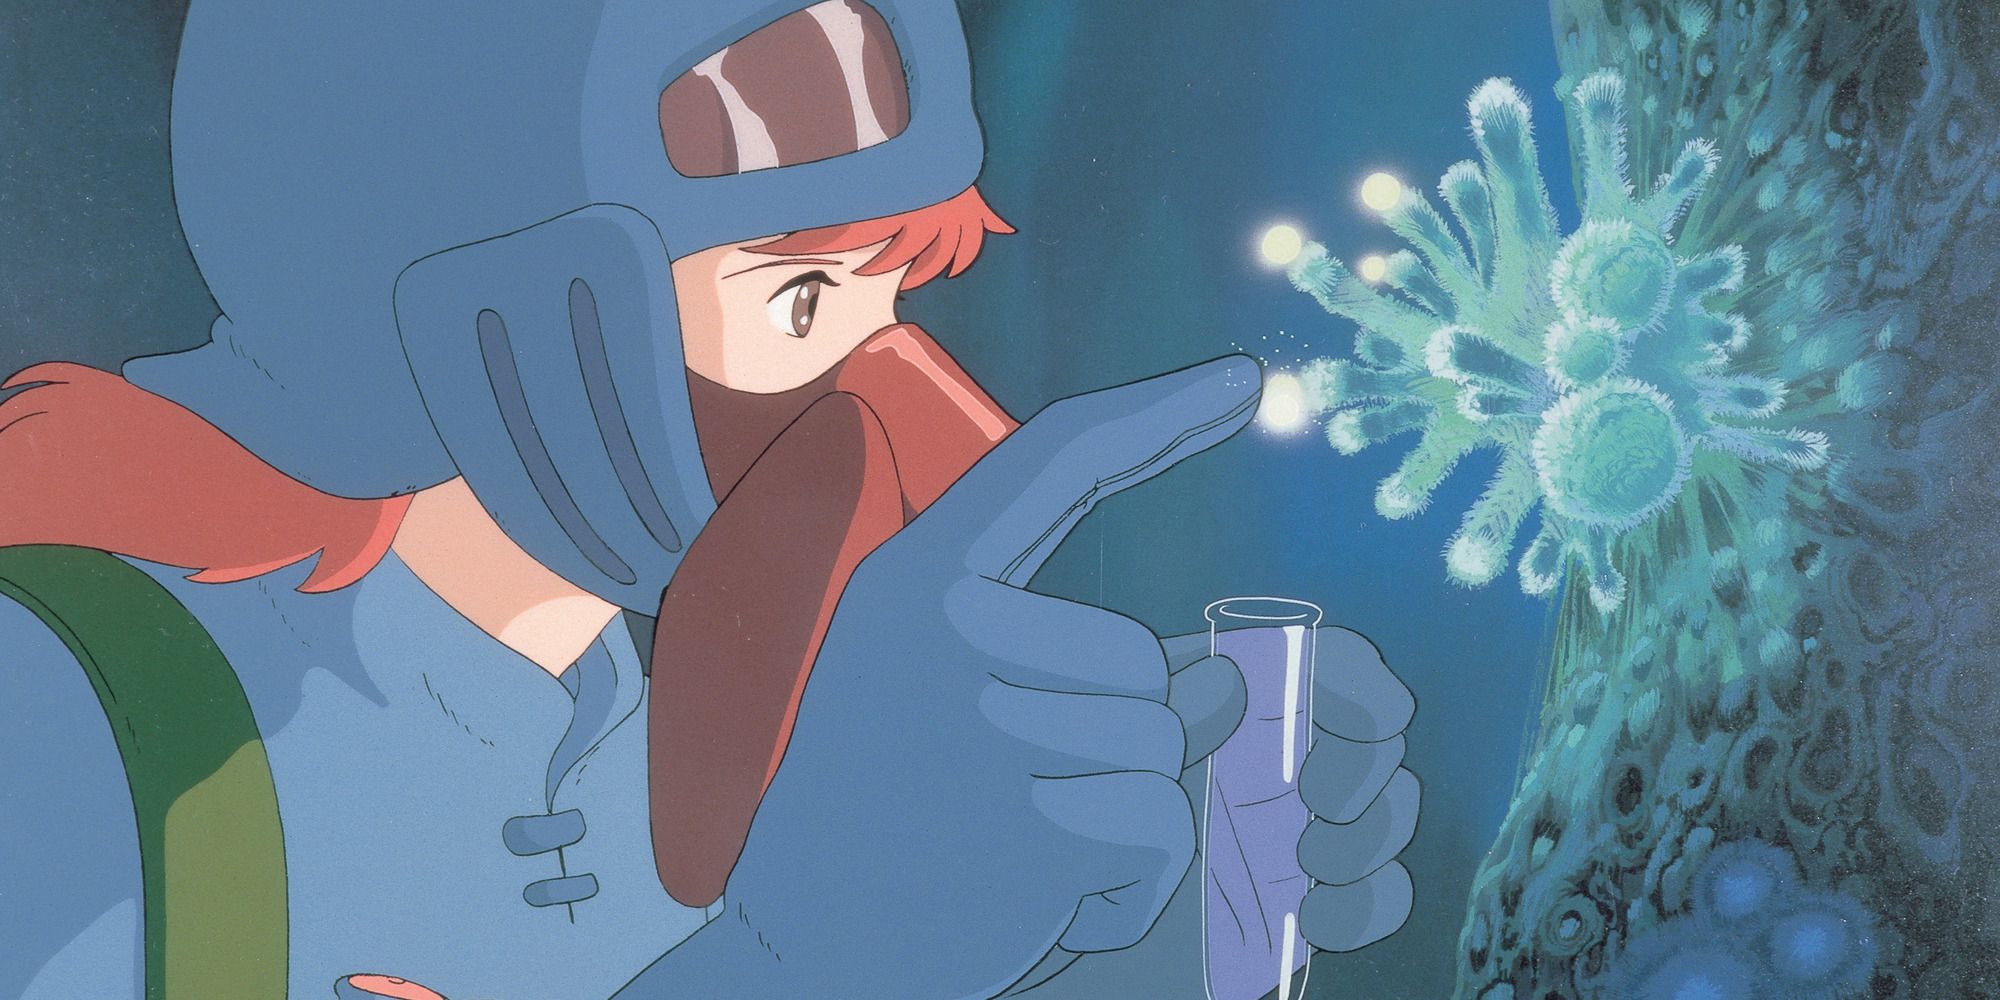 Nausicaa Of The Valley Of The Wind spore collection